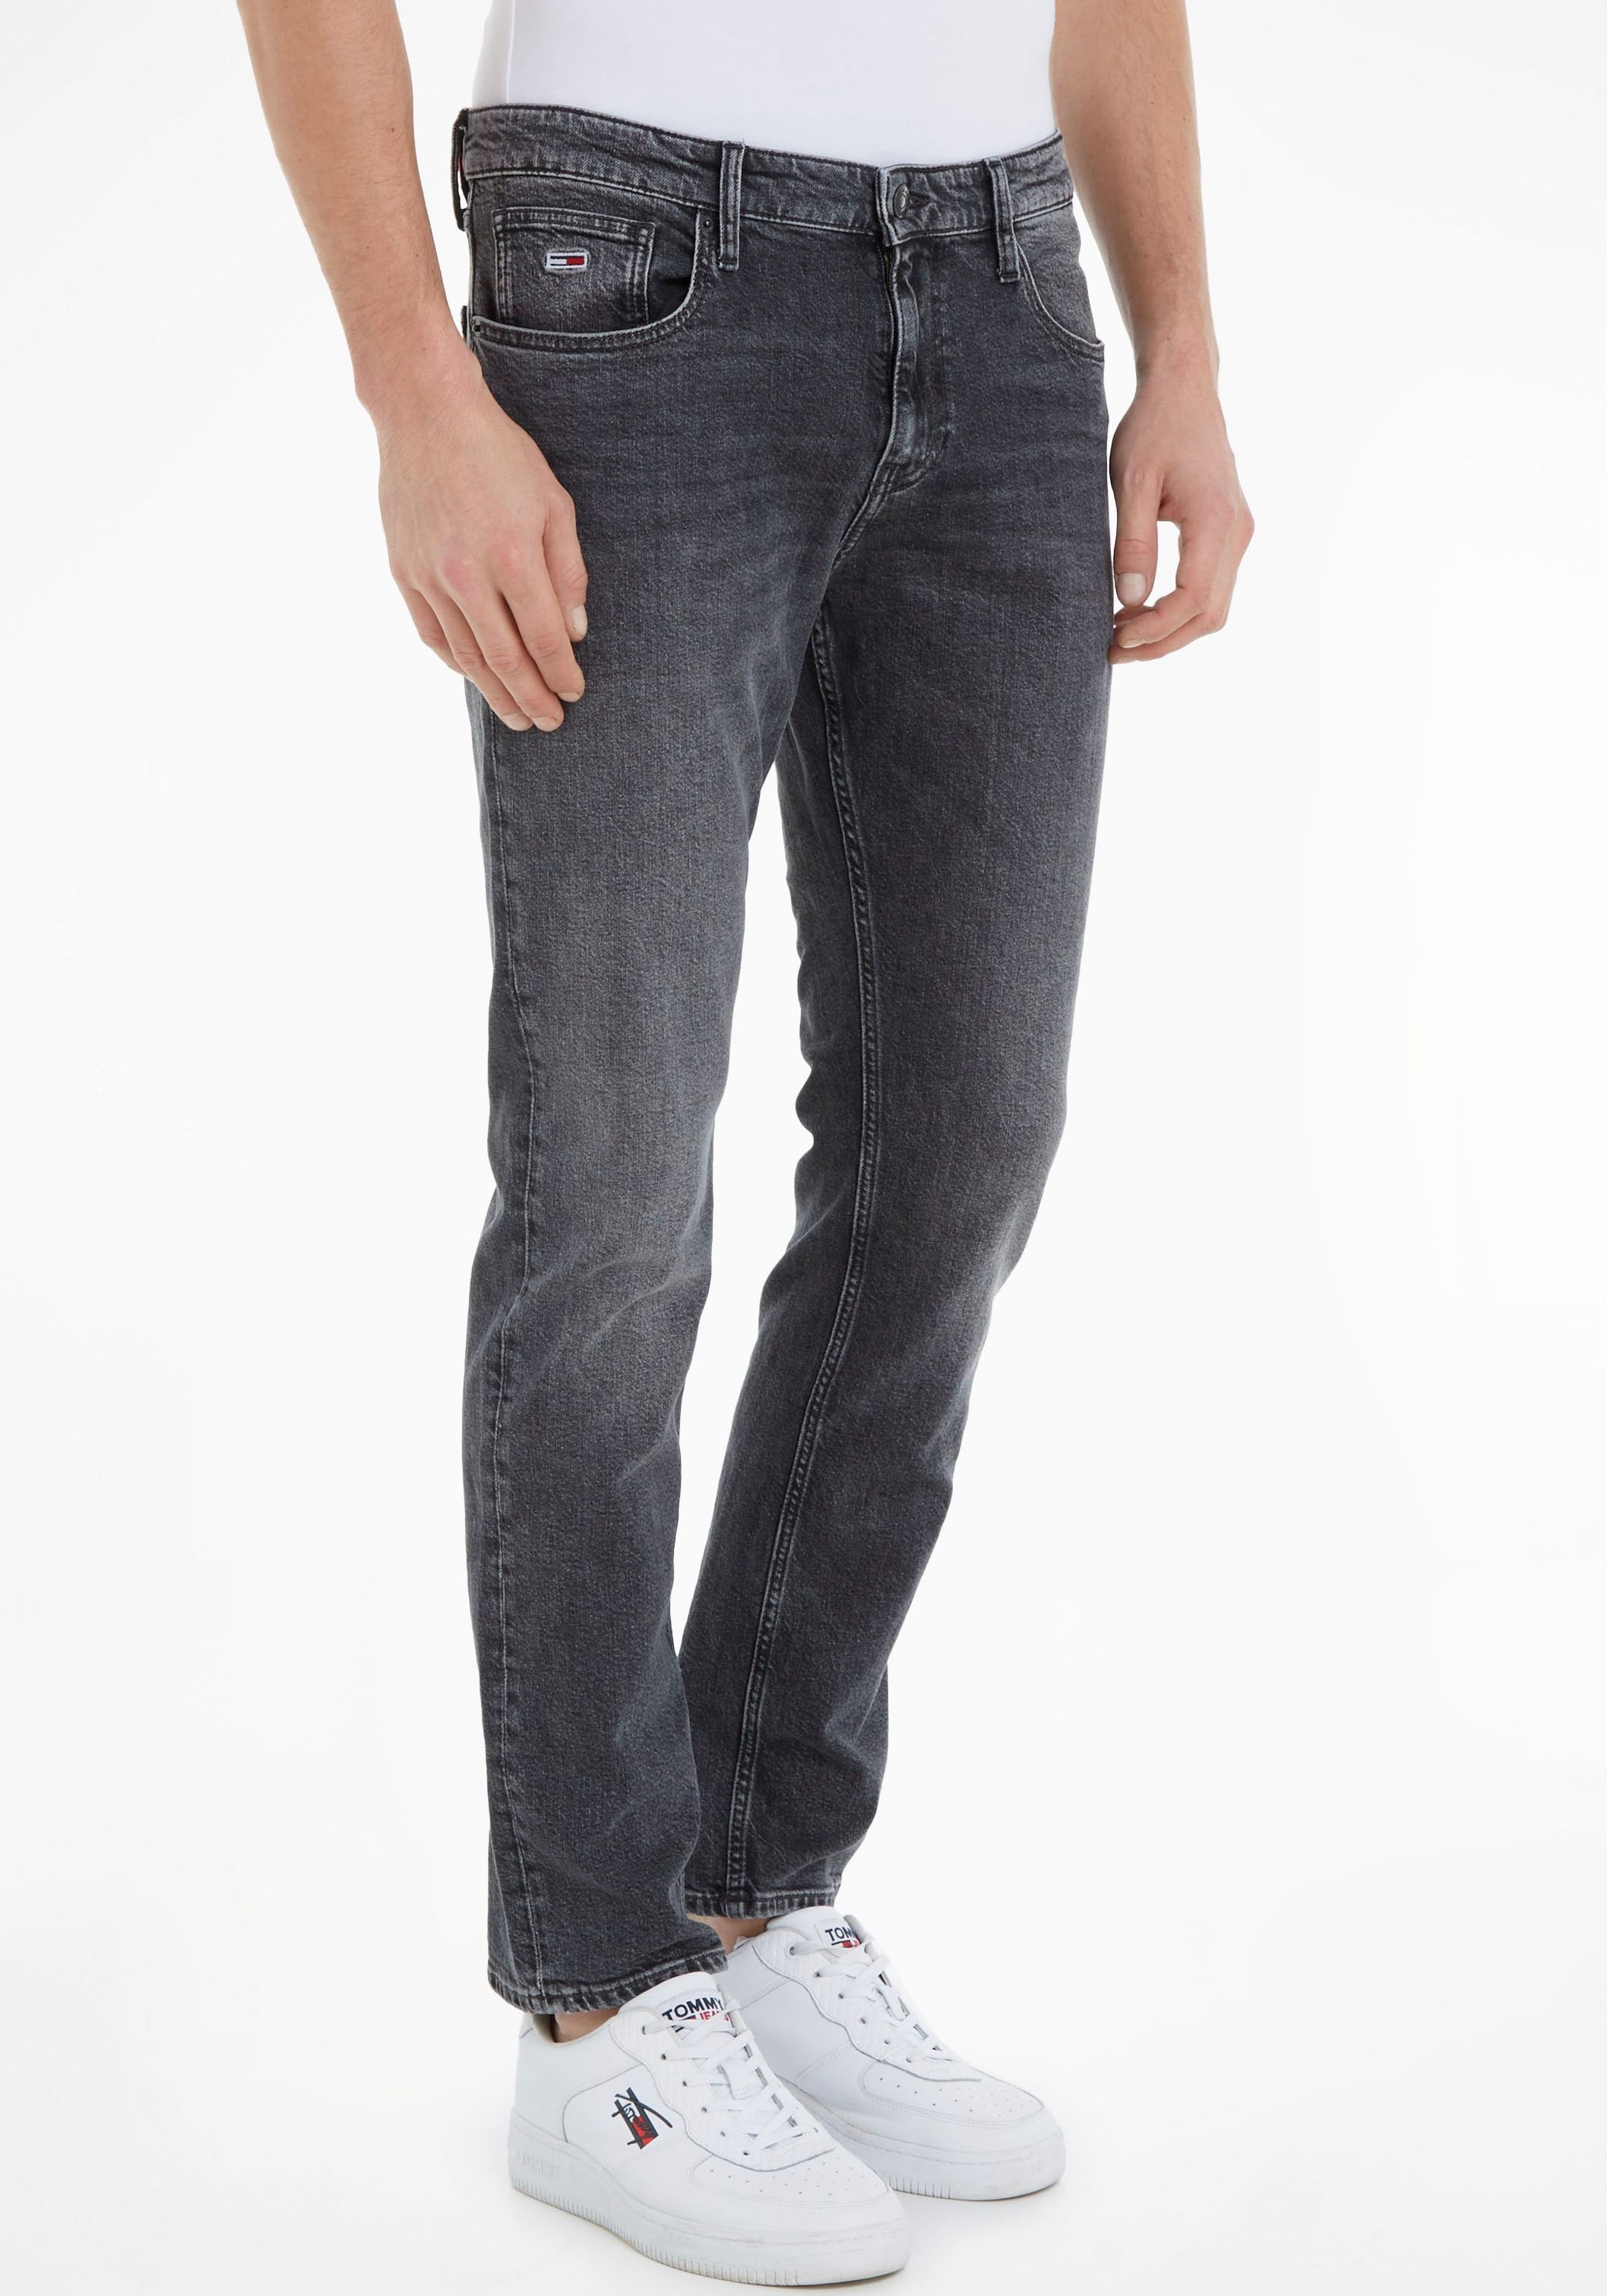 bei RGLR 5-Pocket-Jeans online kaufen Jeans OTTO »RYAN STRGHT« Tommy